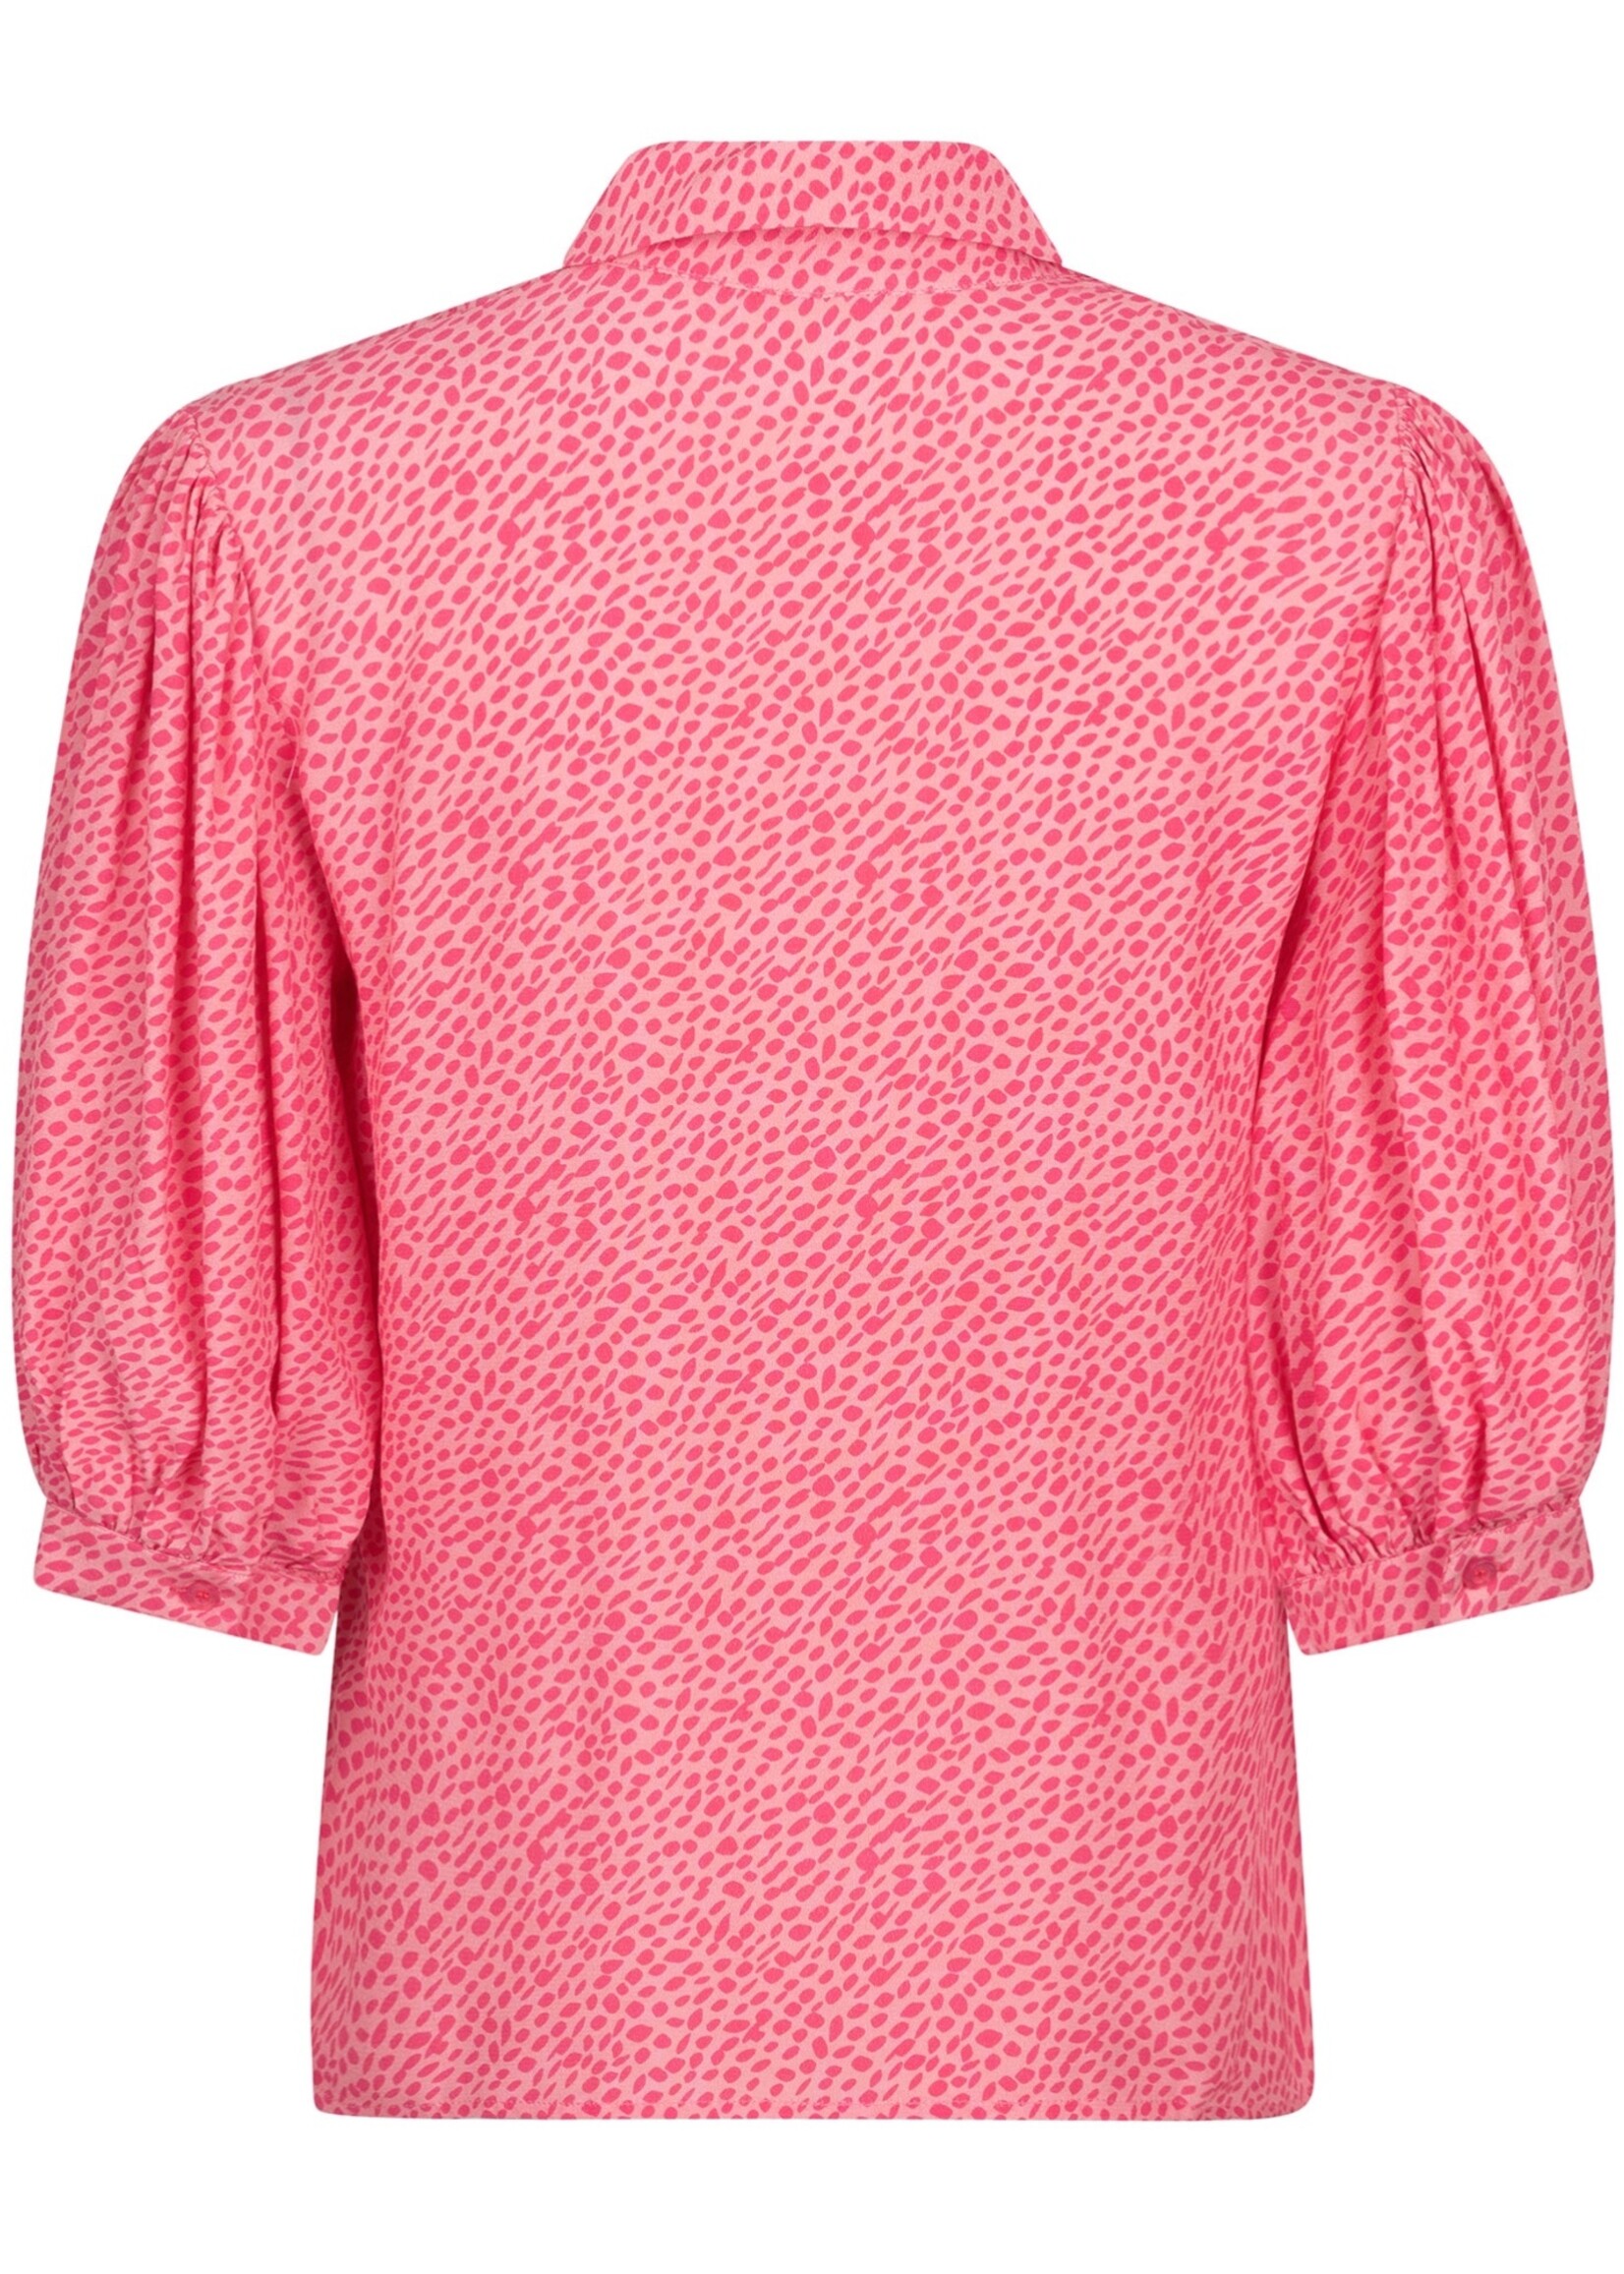 Ydence blouse Amber pink dots